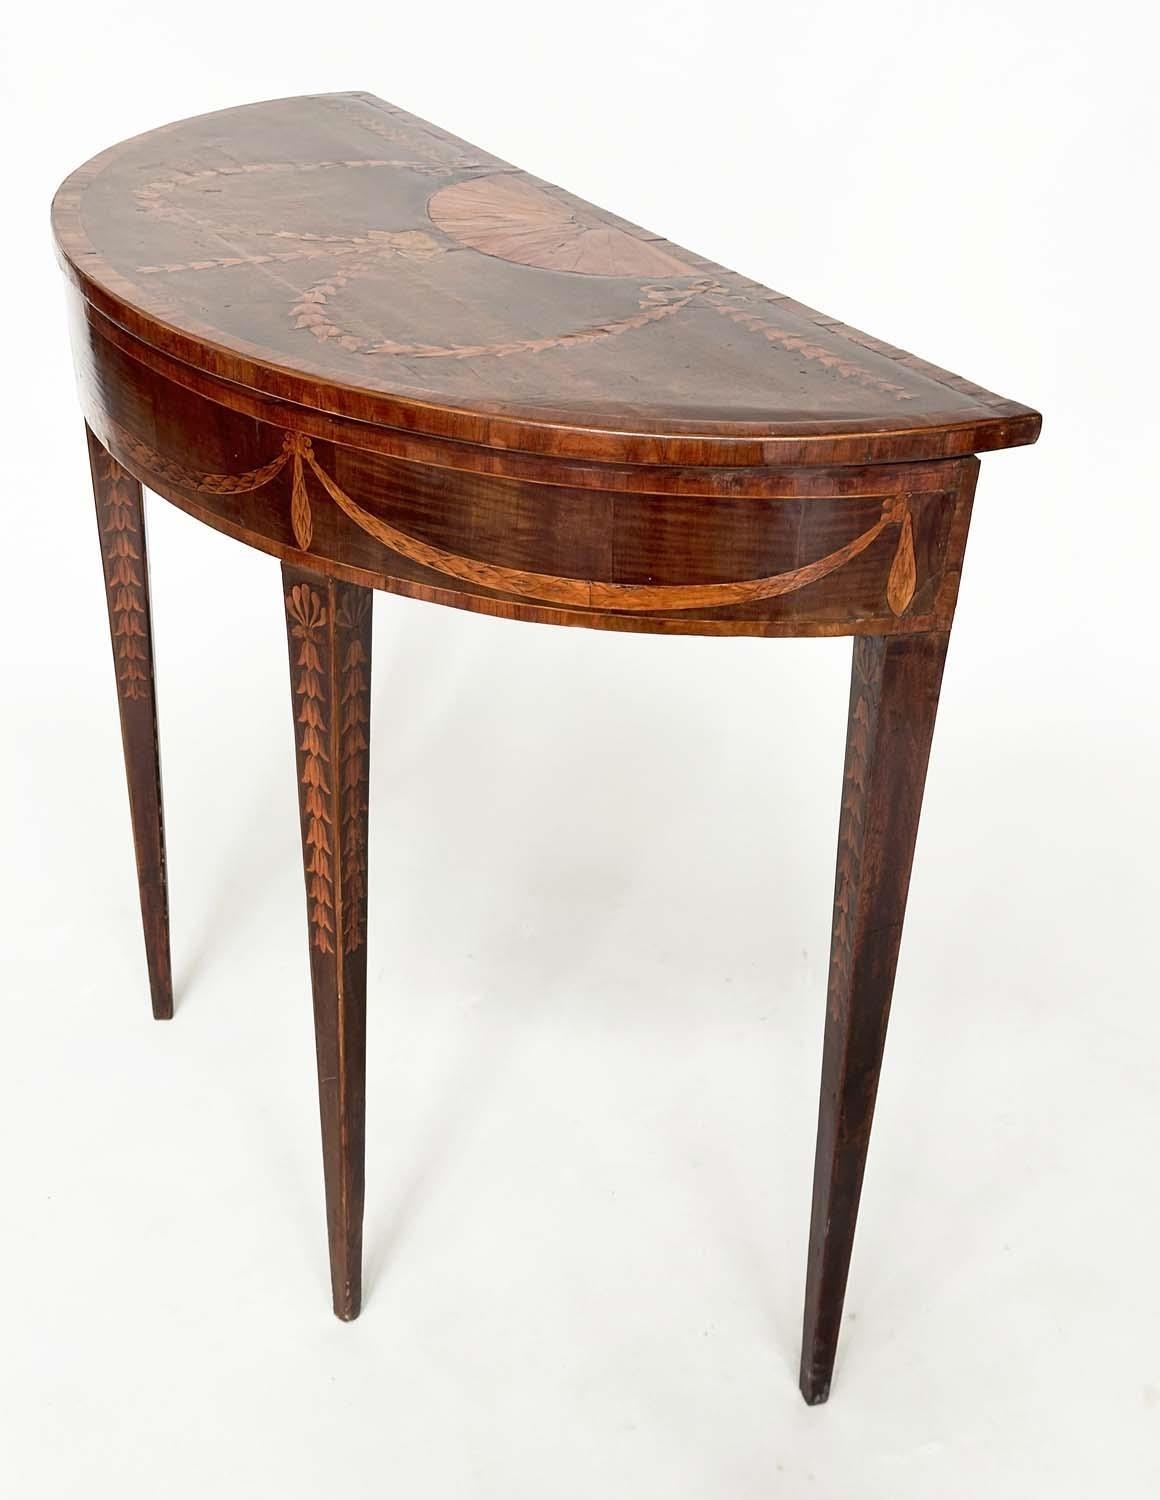 DEMI LUNE SIDE TABLE, George III, probably Irish, fiddle back mahogany and satinwood marquetry - Image 3 of 16